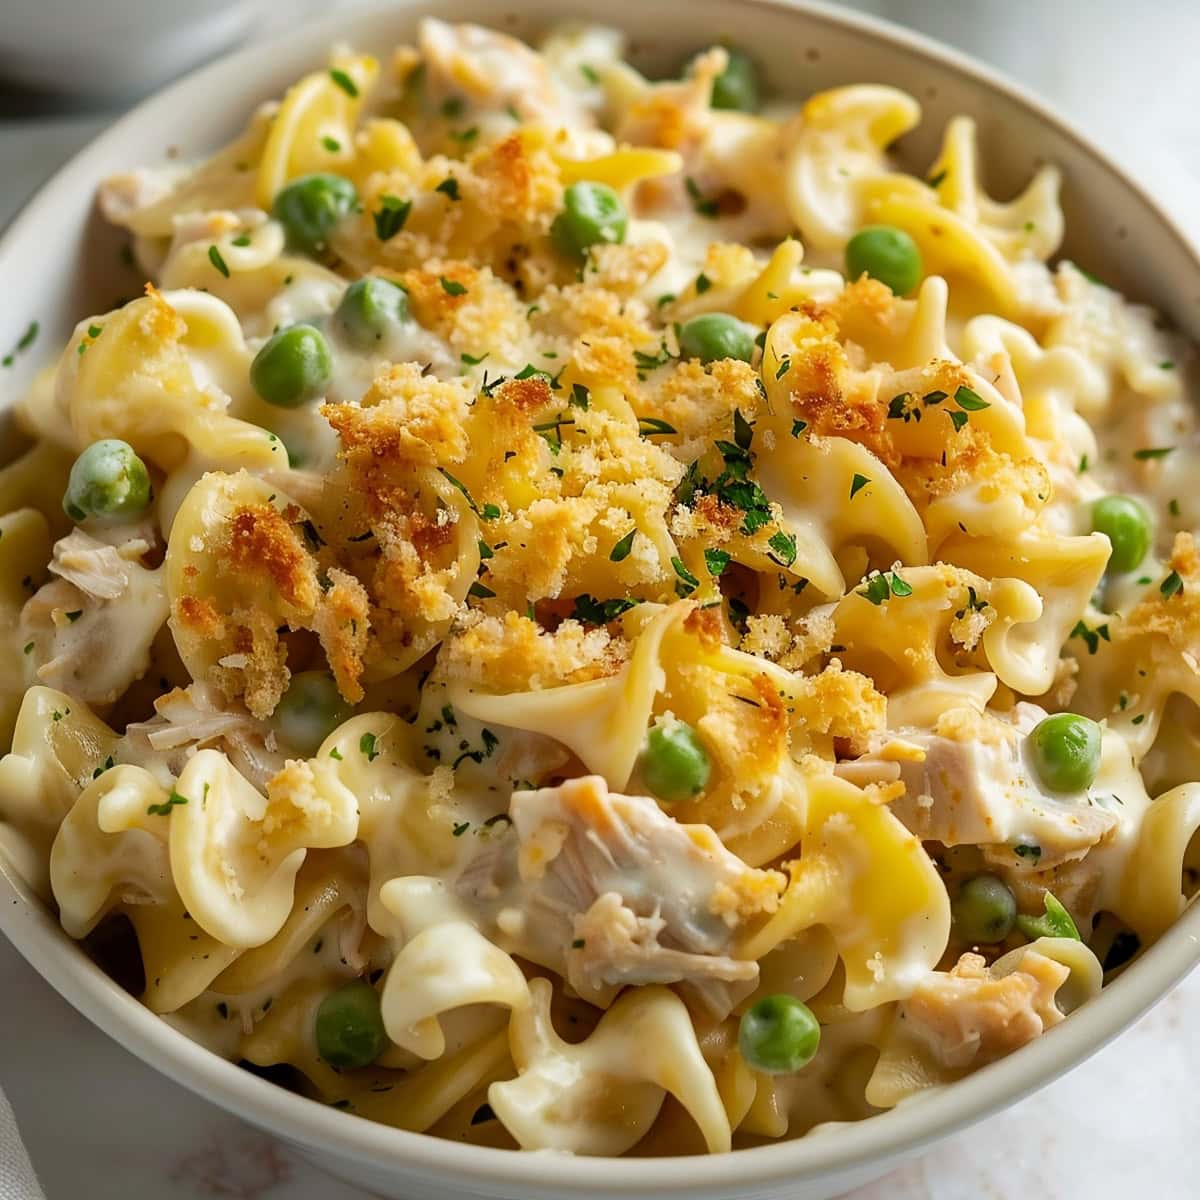 A bowl of rich and creamy tuna and noodles with green peas.